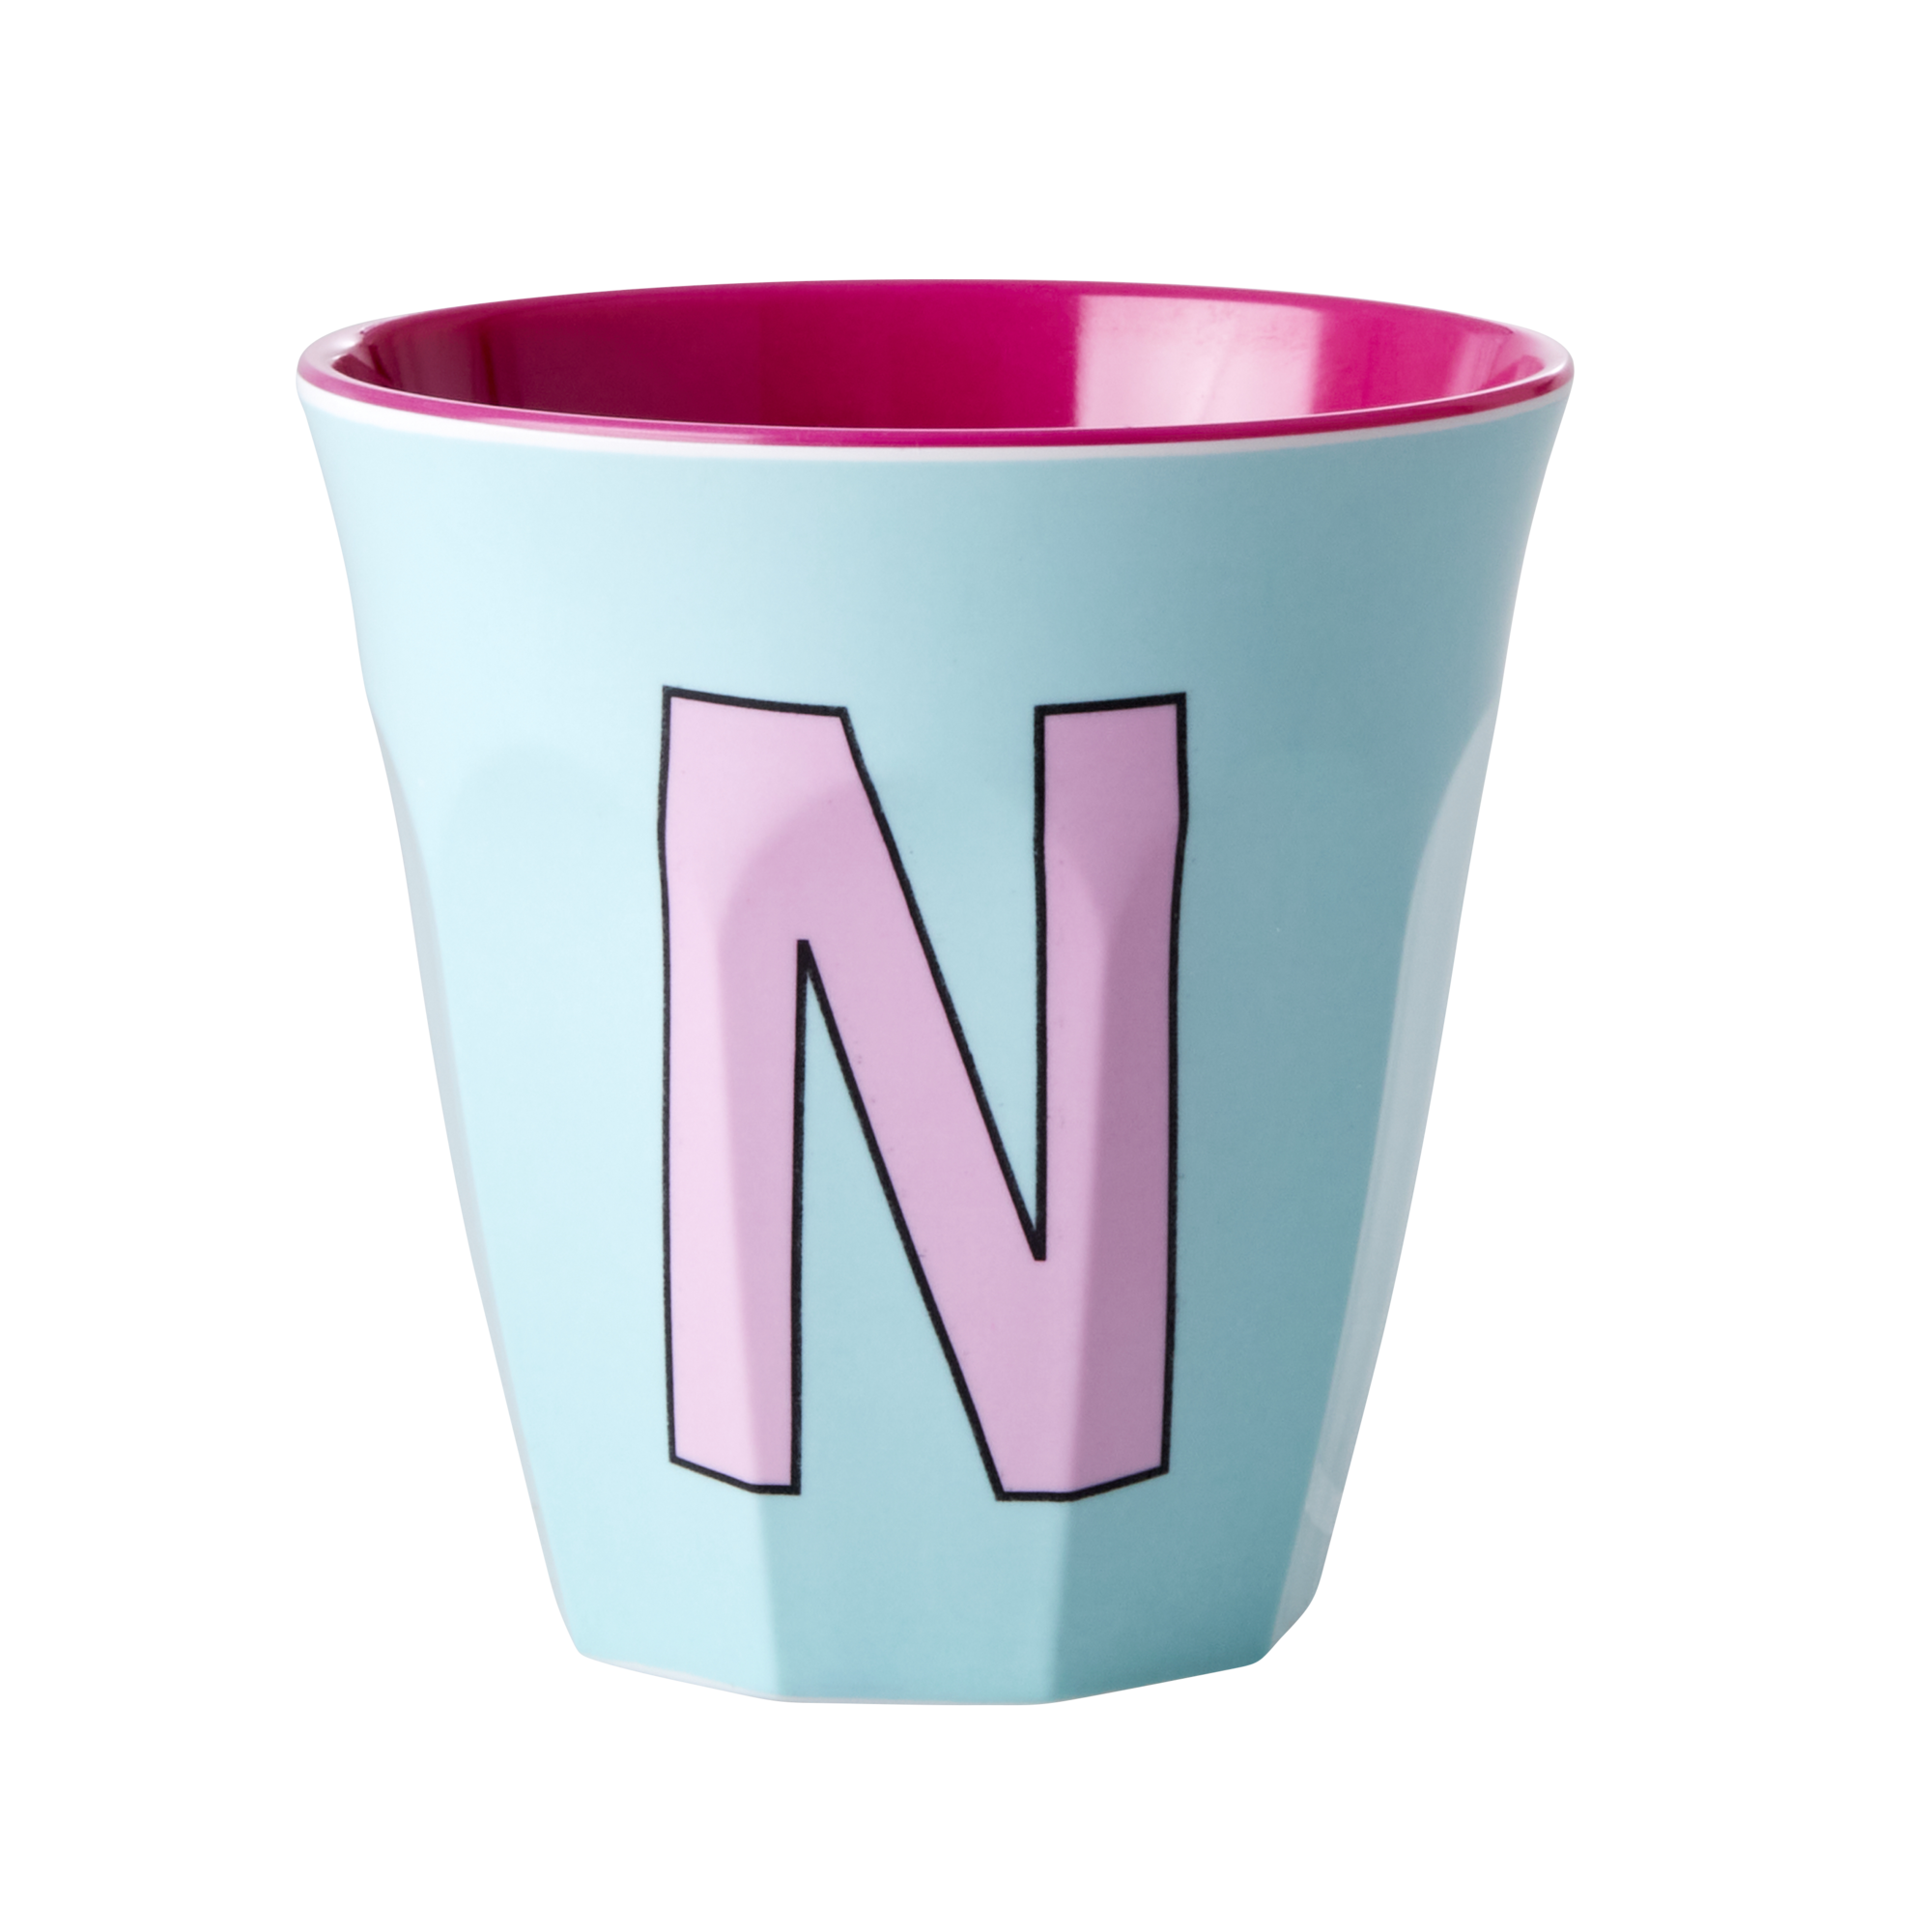 Melamine cup by Rice by Rice in the colors light blue, pink, and red with the letter "O"